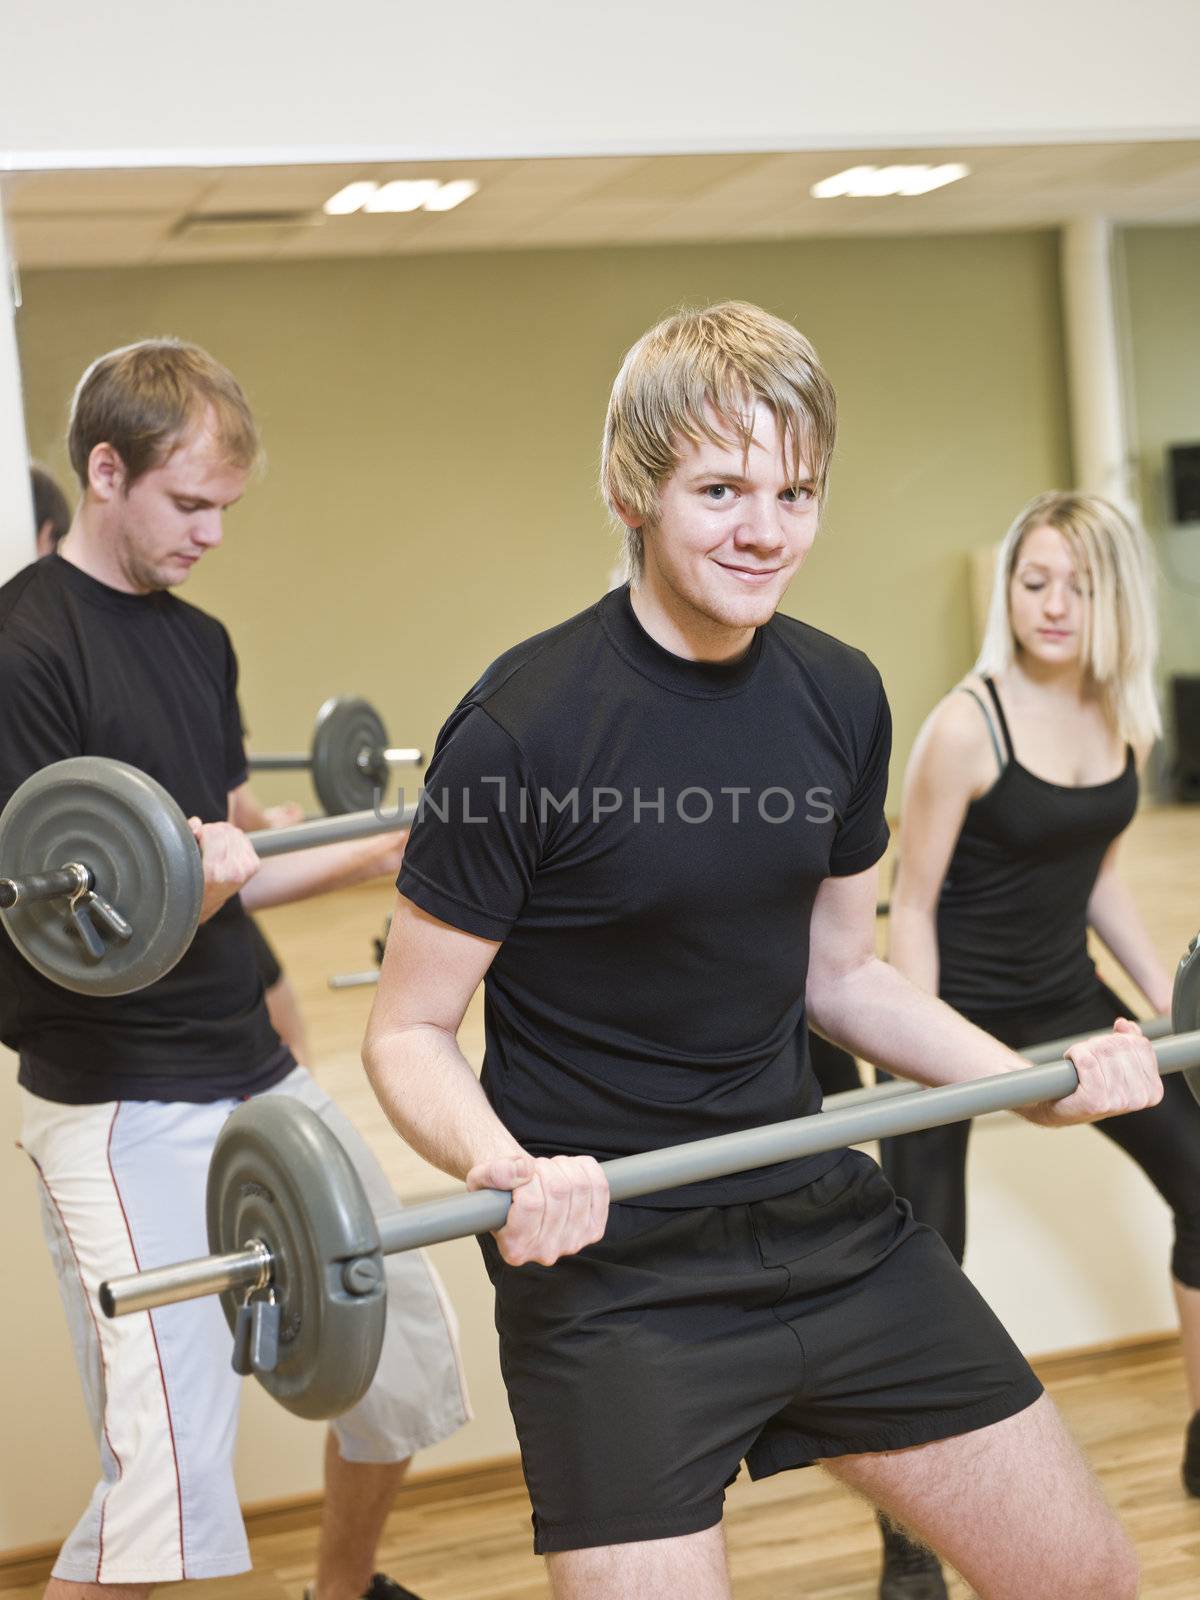 Group of people lifting weights by gemenacom